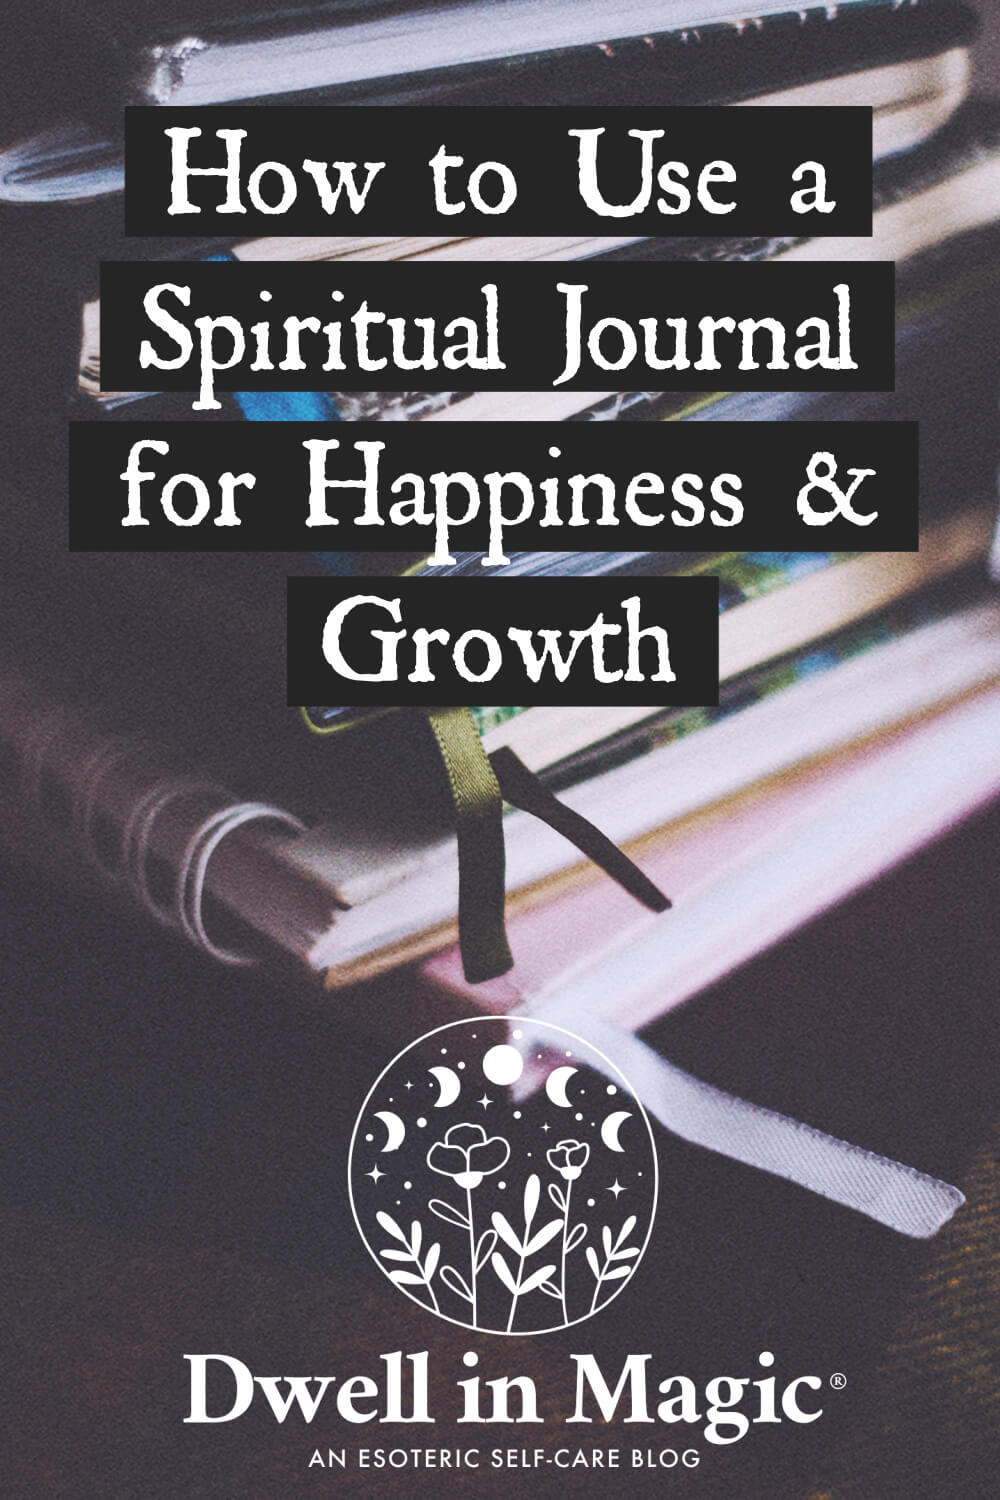 How to use a spiritual journal for happiness and growth